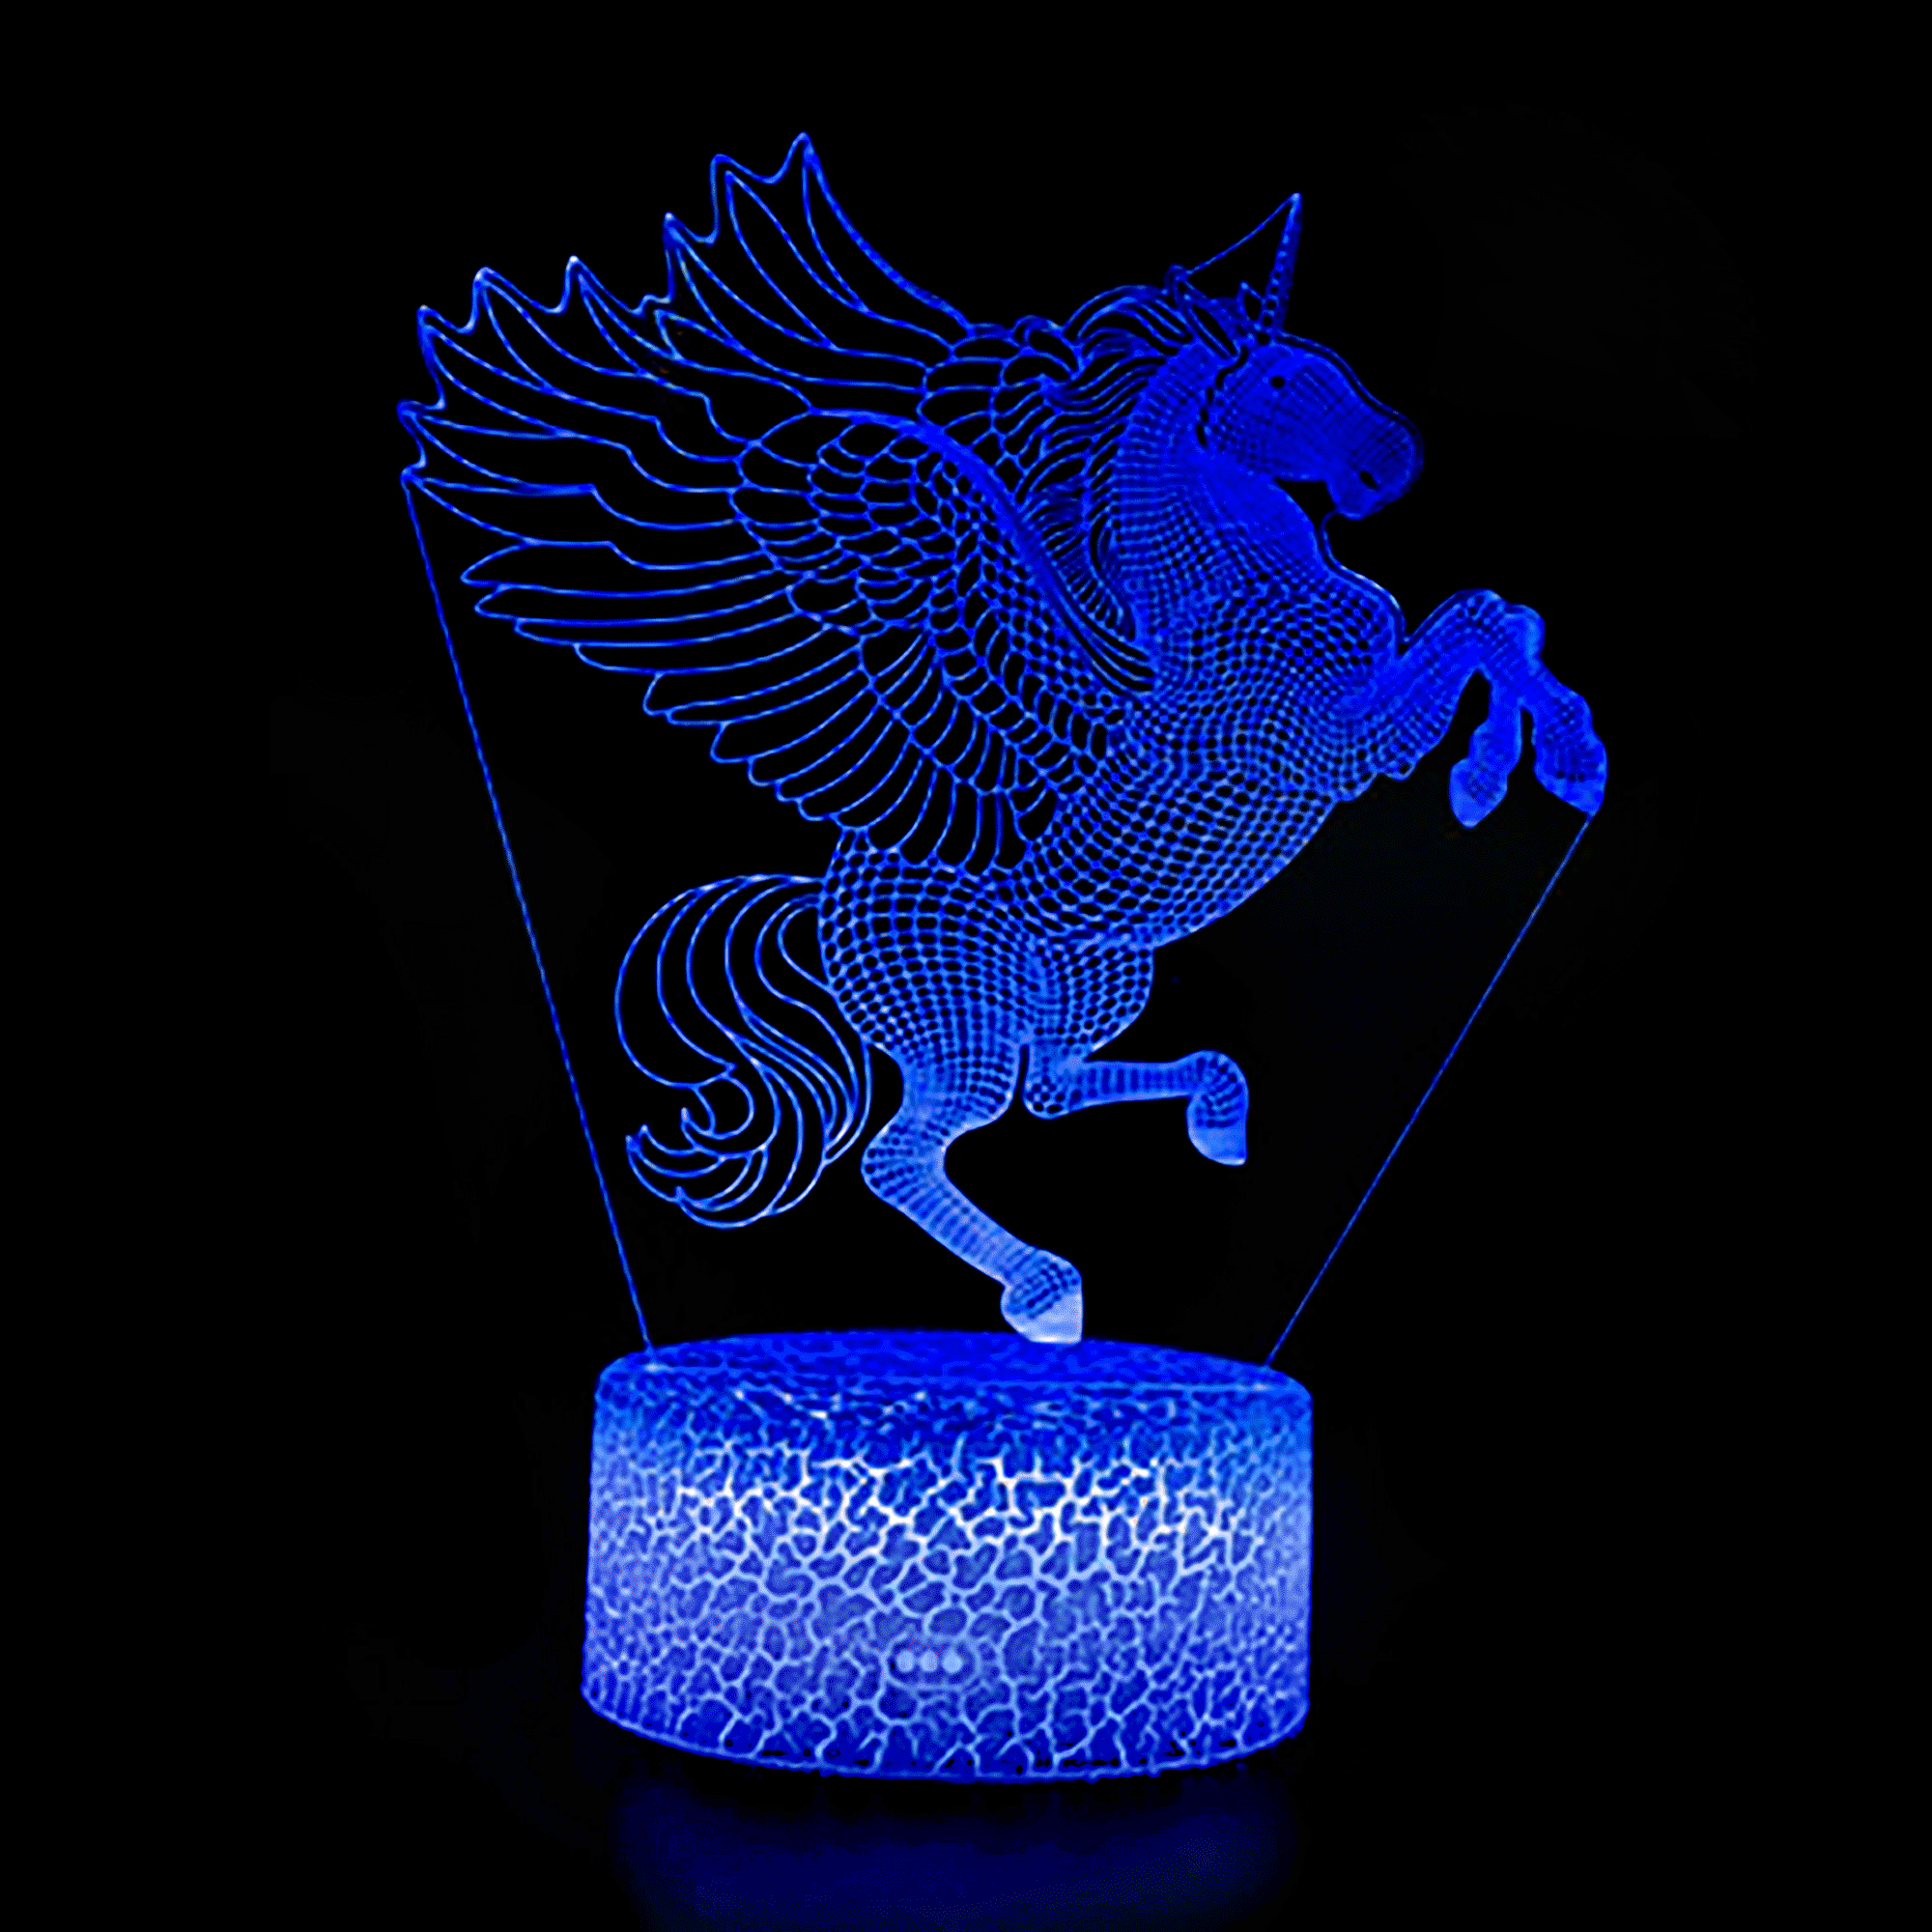 LED Night Light 3D Unicorn shaped Touch Remote Control Table lamp Gift for kids 